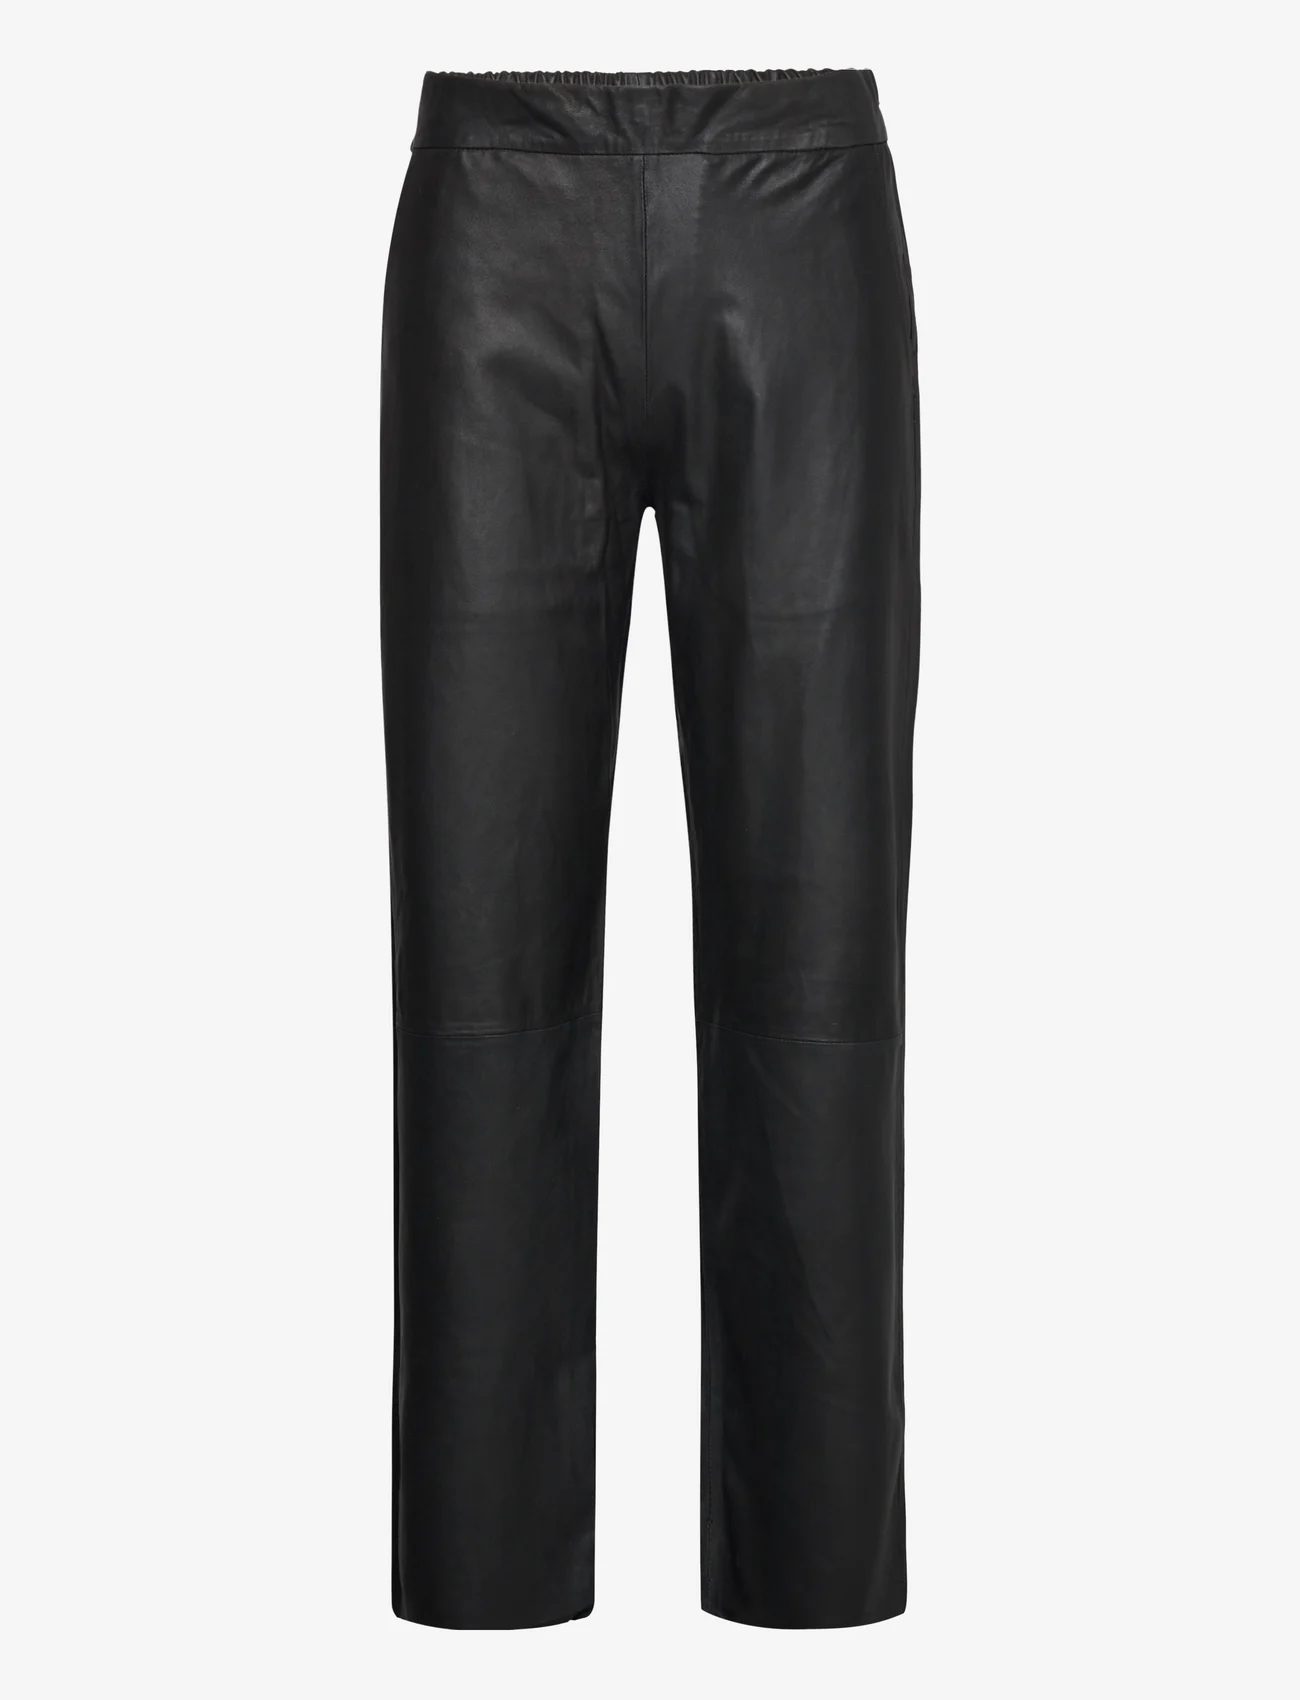 DEPECHE - Pants - party wear at outlet prices - black - 0